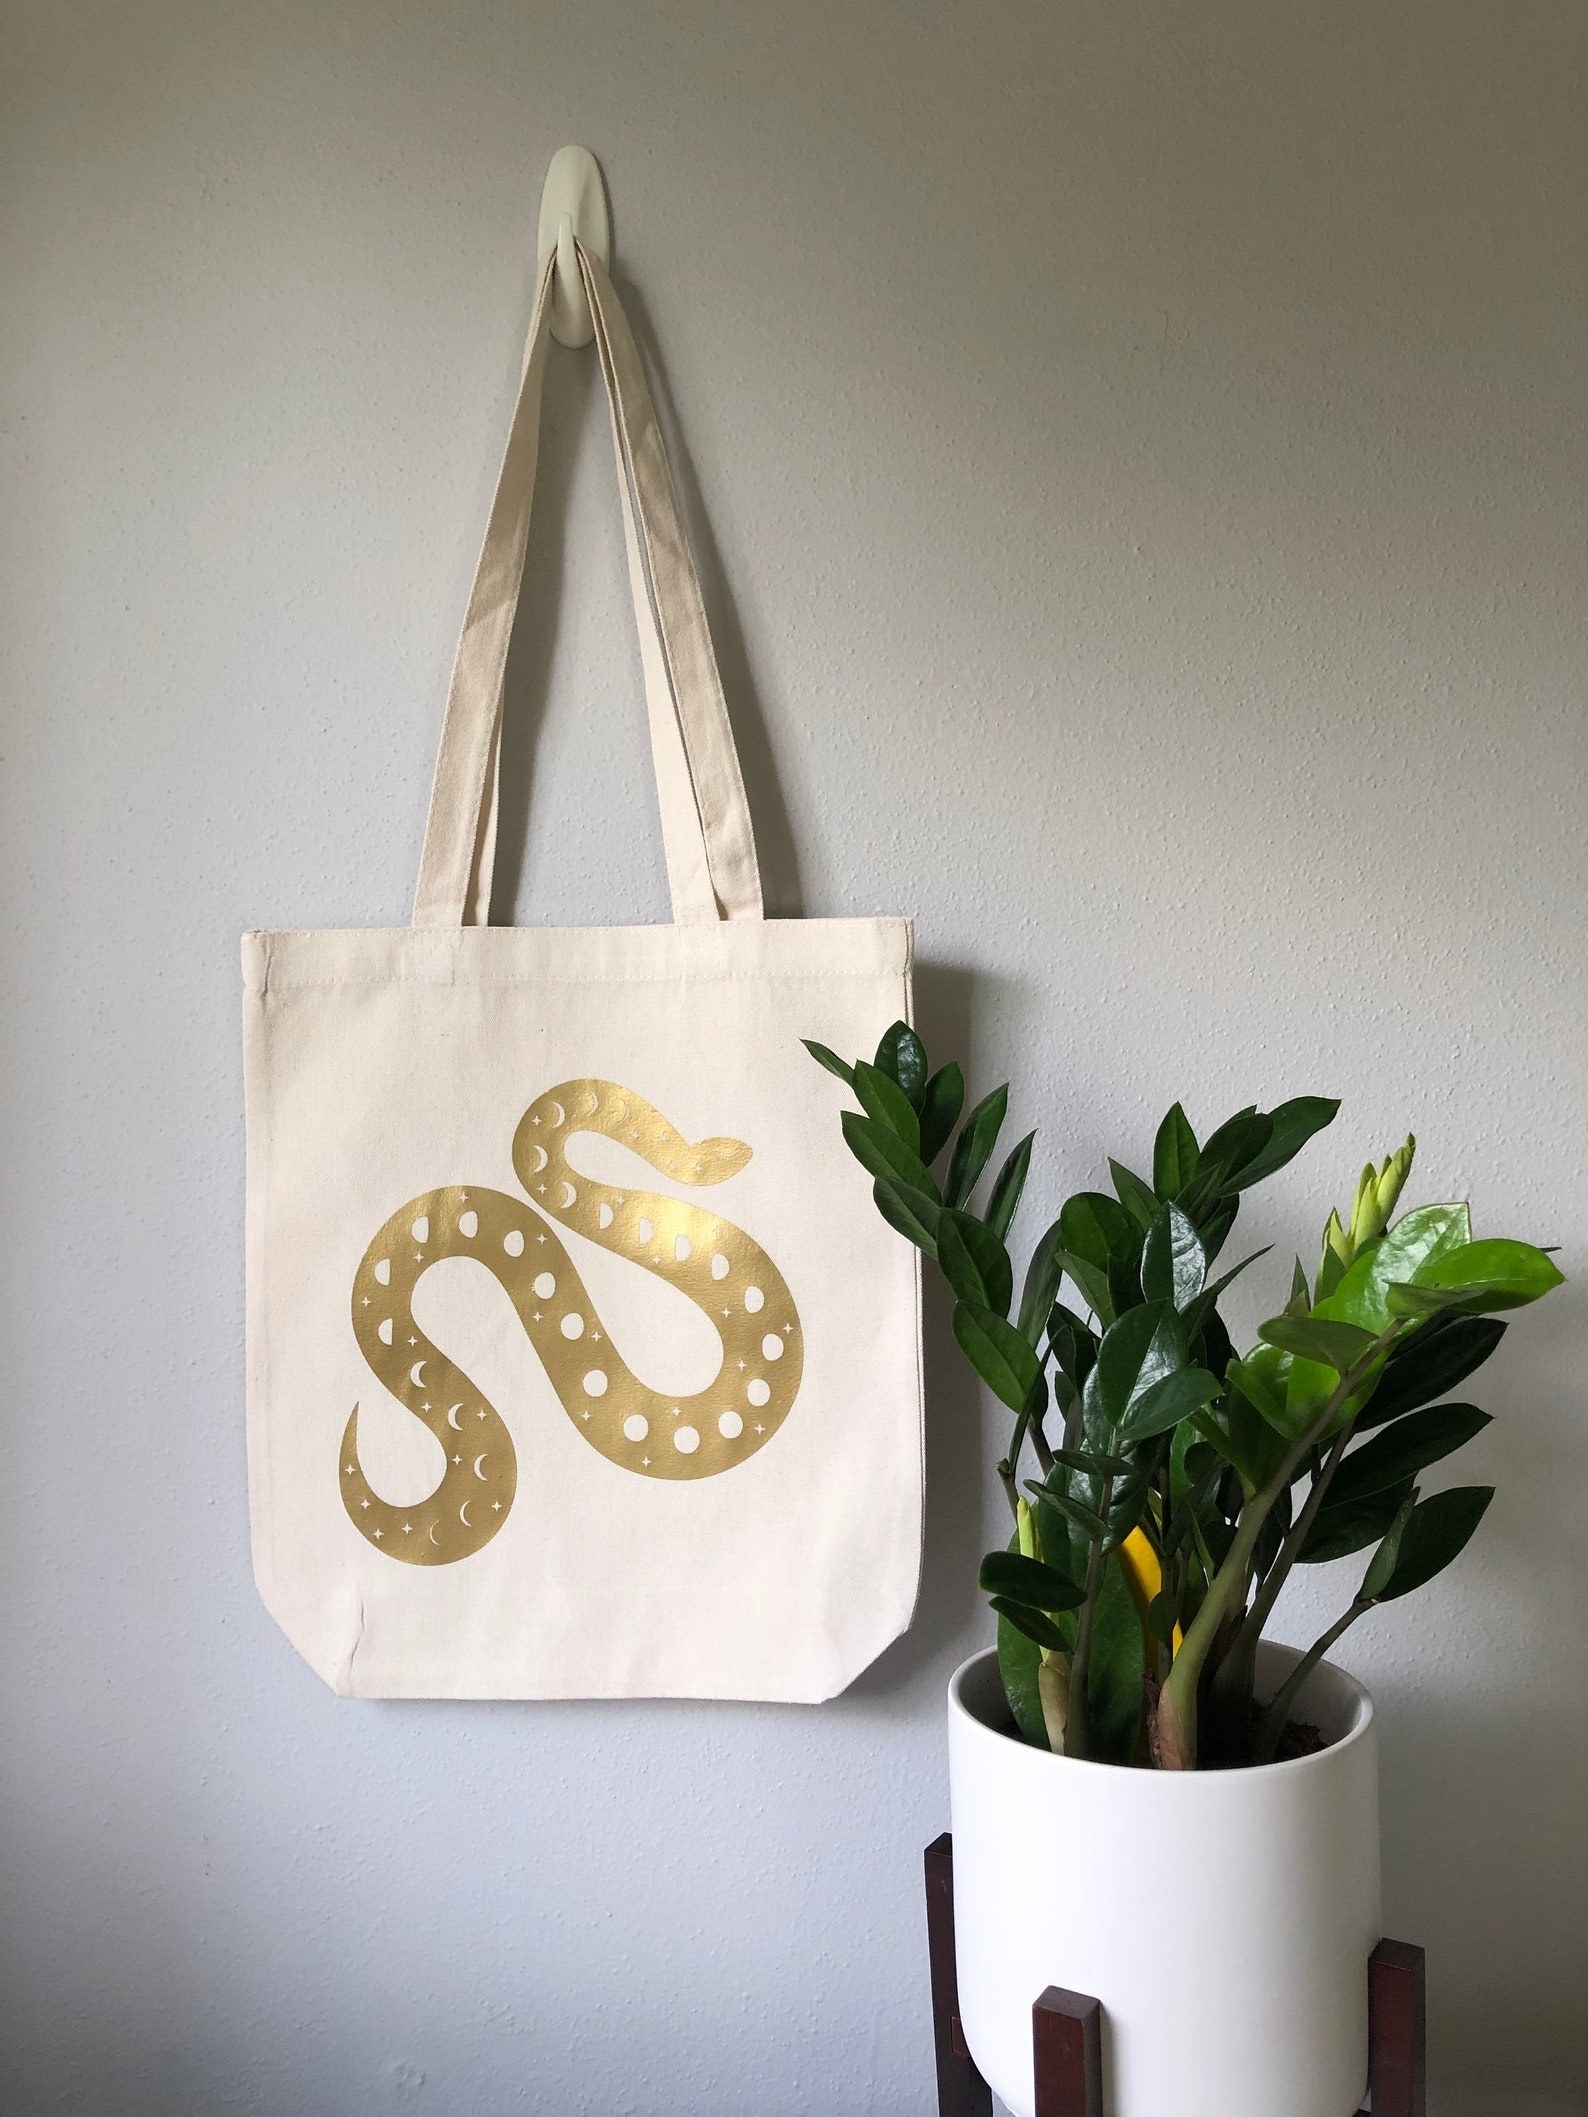 tote bag with gold snake pattern on it